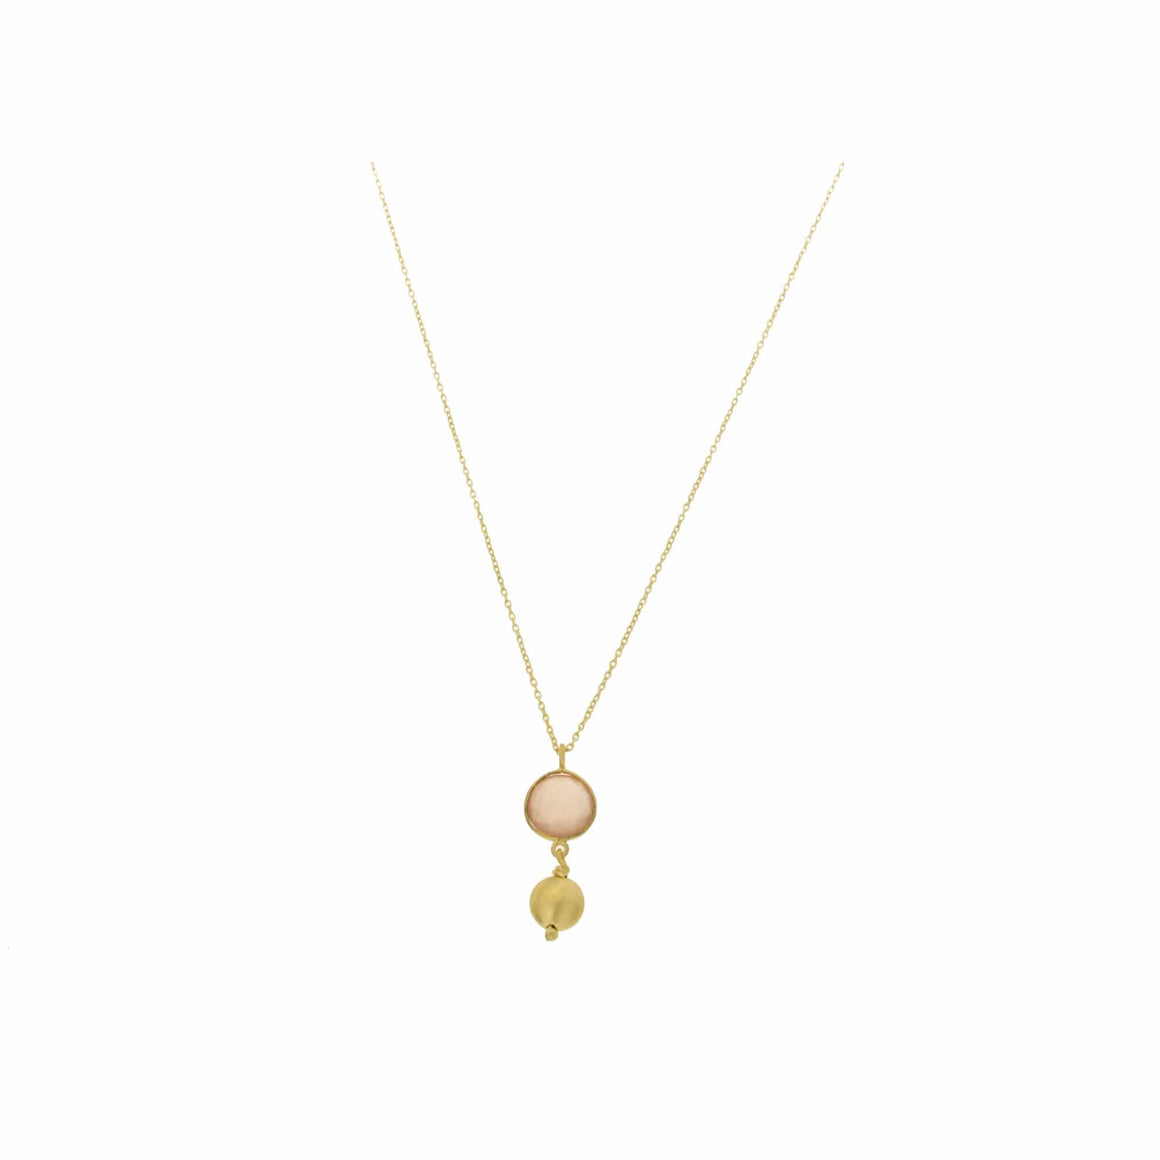 Manjusha Jewels Necklaces Pink Gold Drop Pendant in Pink Chalcedony